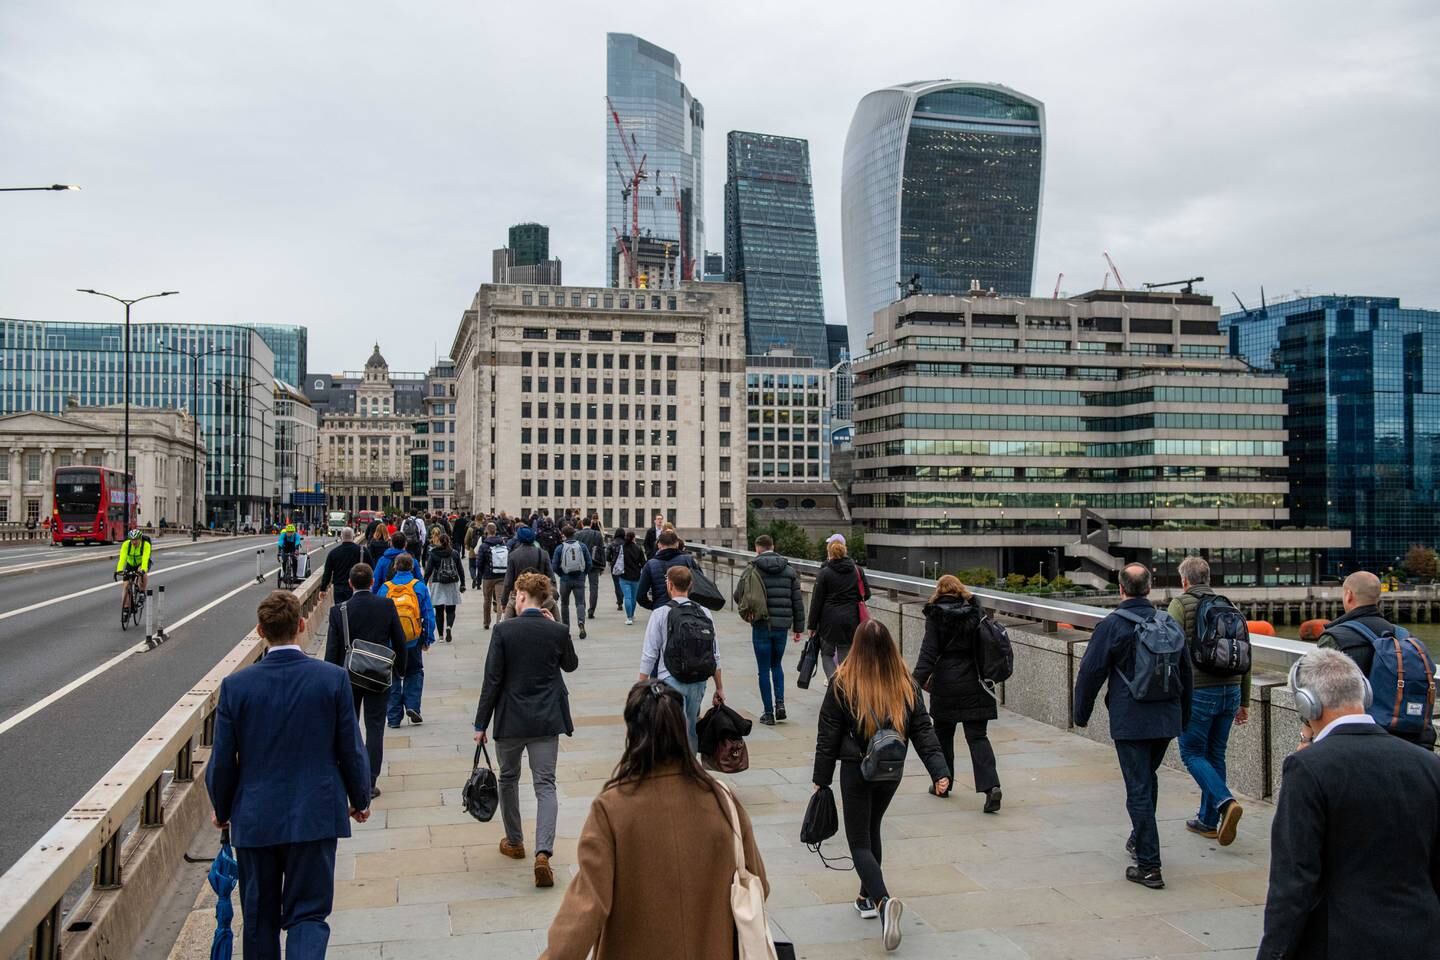 Commuters make their way over London Bridge towards the City of London, as workers slowly return to the city. Bloomberg